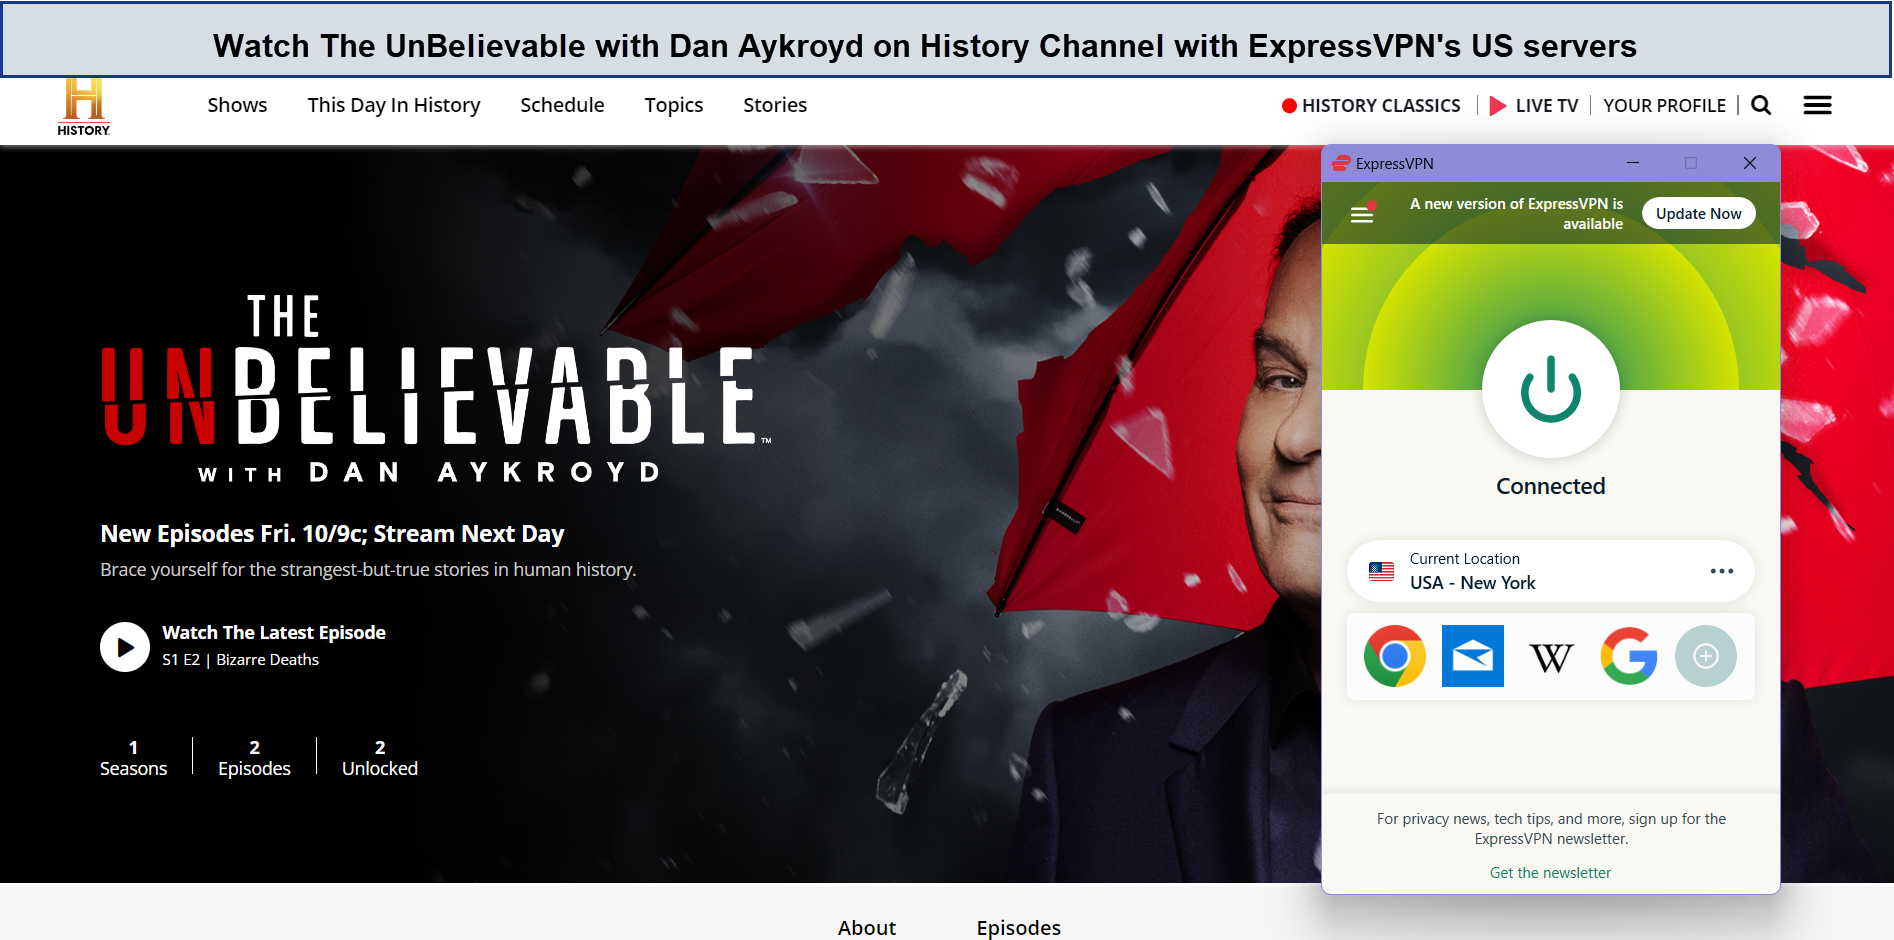 Watch-The-UnBelievable-with-Dan-Aykroyd-on-History-Channel-with-ExpressVPN-outside-USA